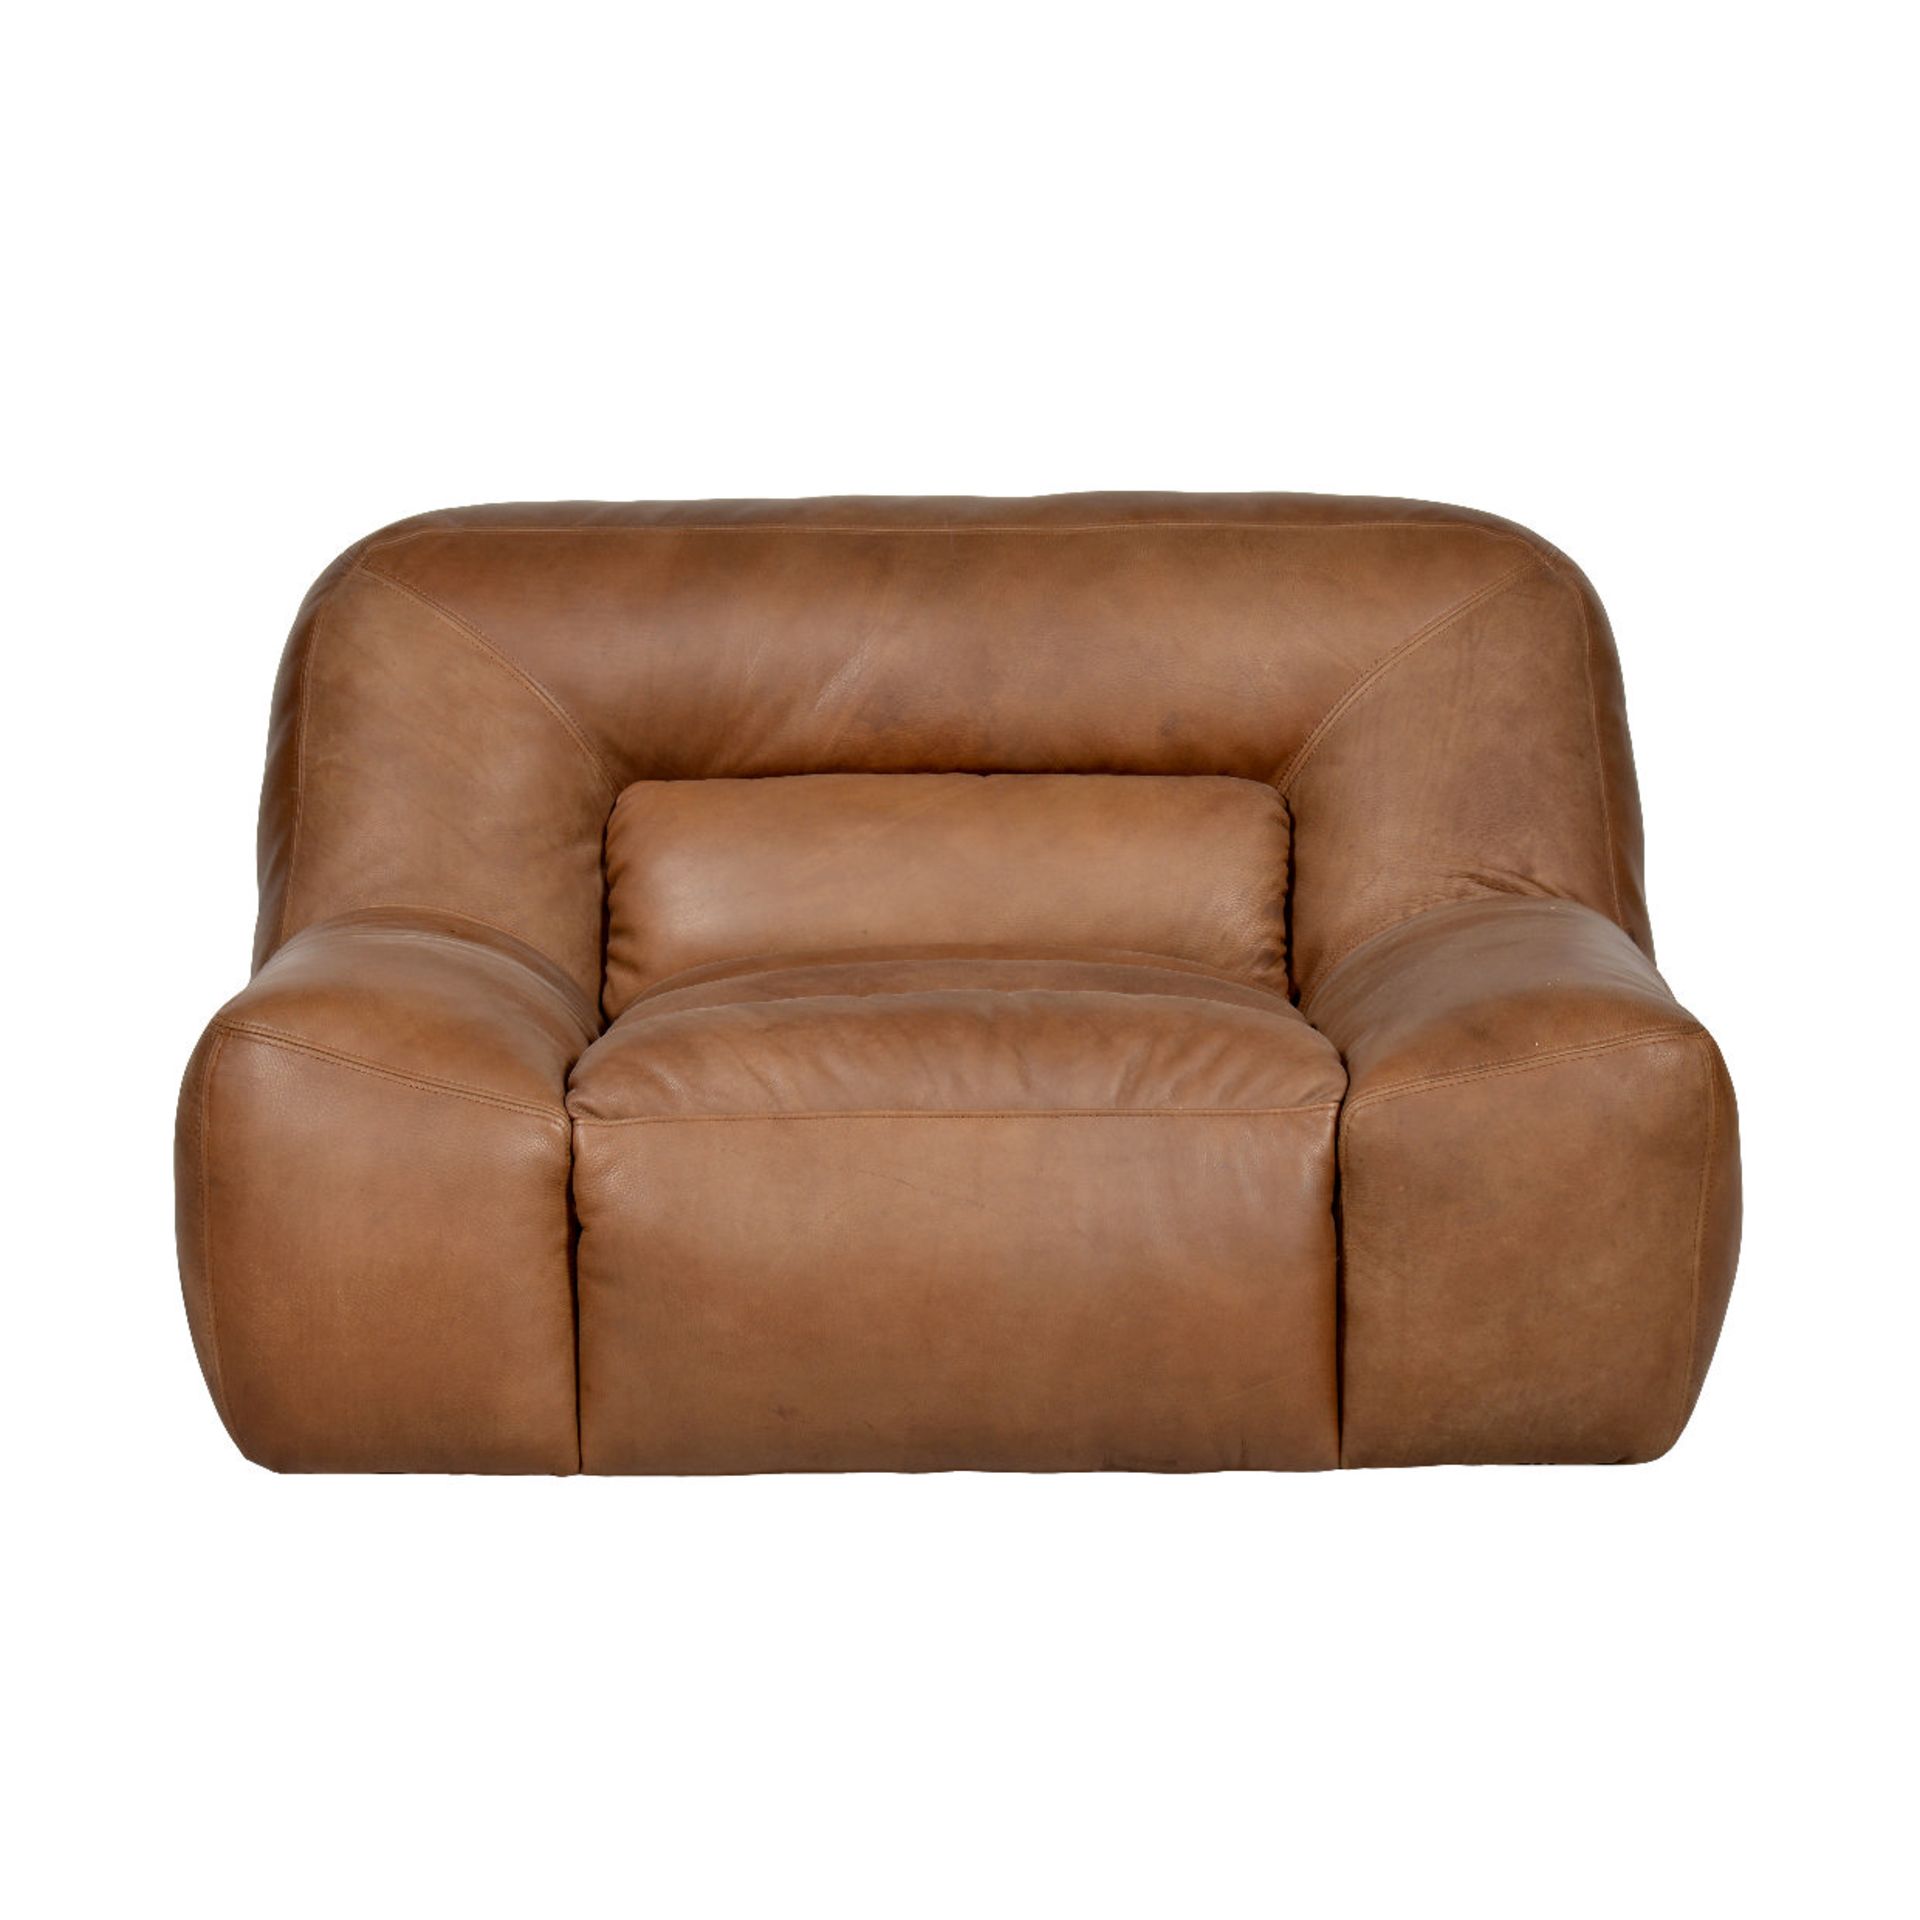 Bendum Sofa 1 Seater Savage Leather The Michelin Man, Or Bibendum As He Is Known, Is The Inspiration - Image 2 of 2